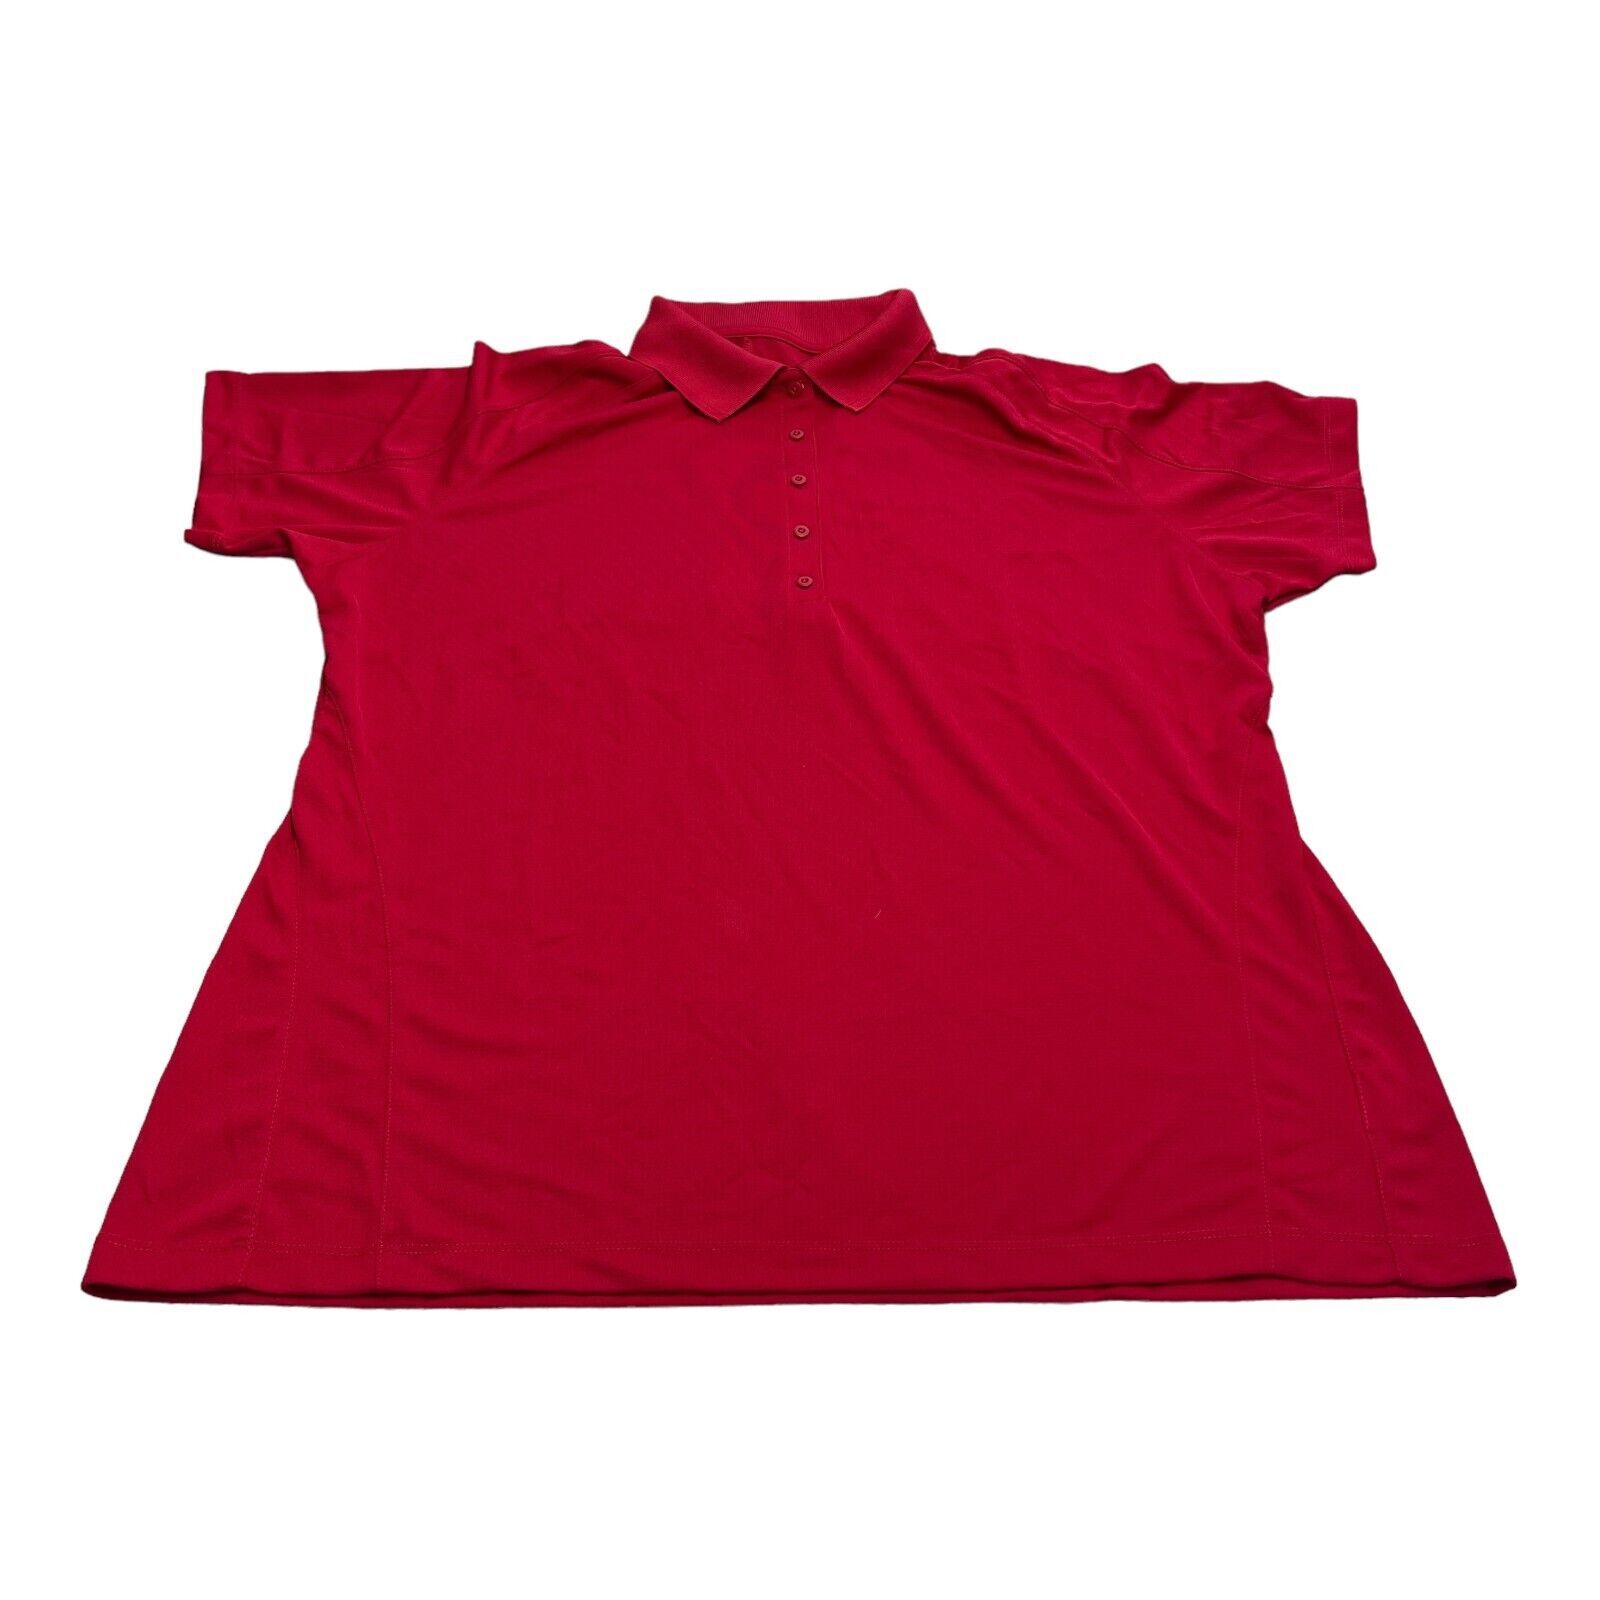 Primary image for The Optimist Polo Shirt Women's 2XL Red 100% Polyester Short Sleeve Collared